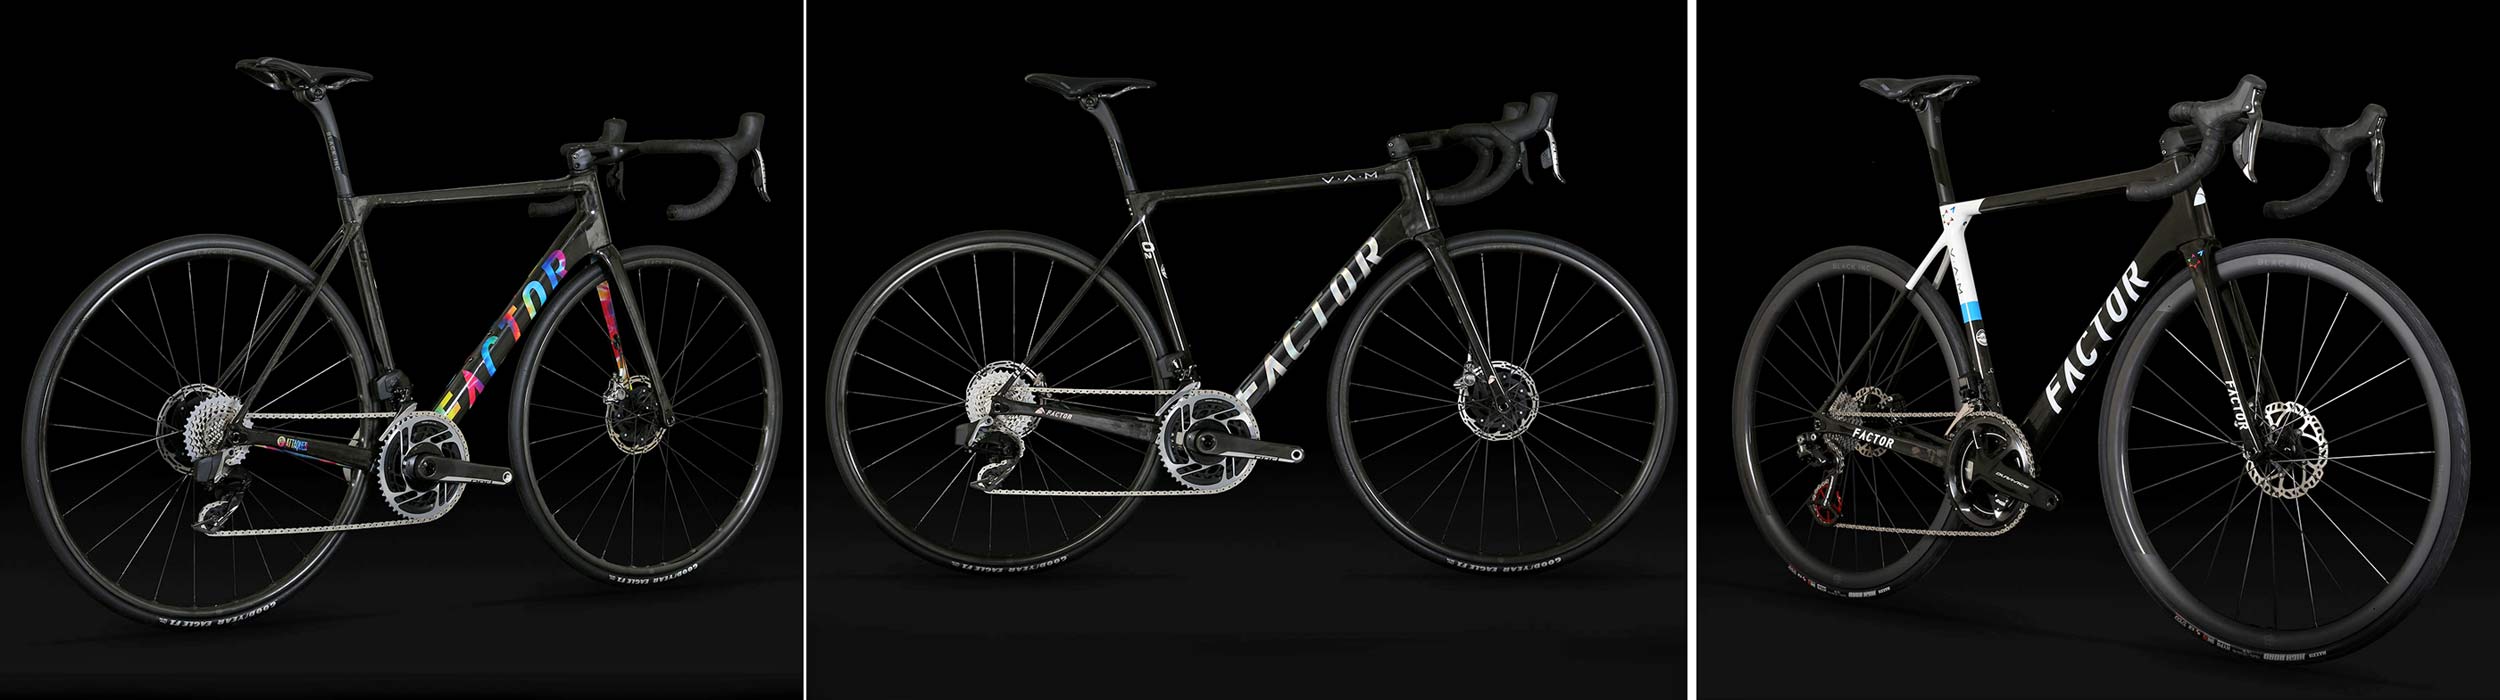 Factor O2 VAM is a full-internal routing ultralight carbon climber's road bike that weighs just 677g, 3 color options